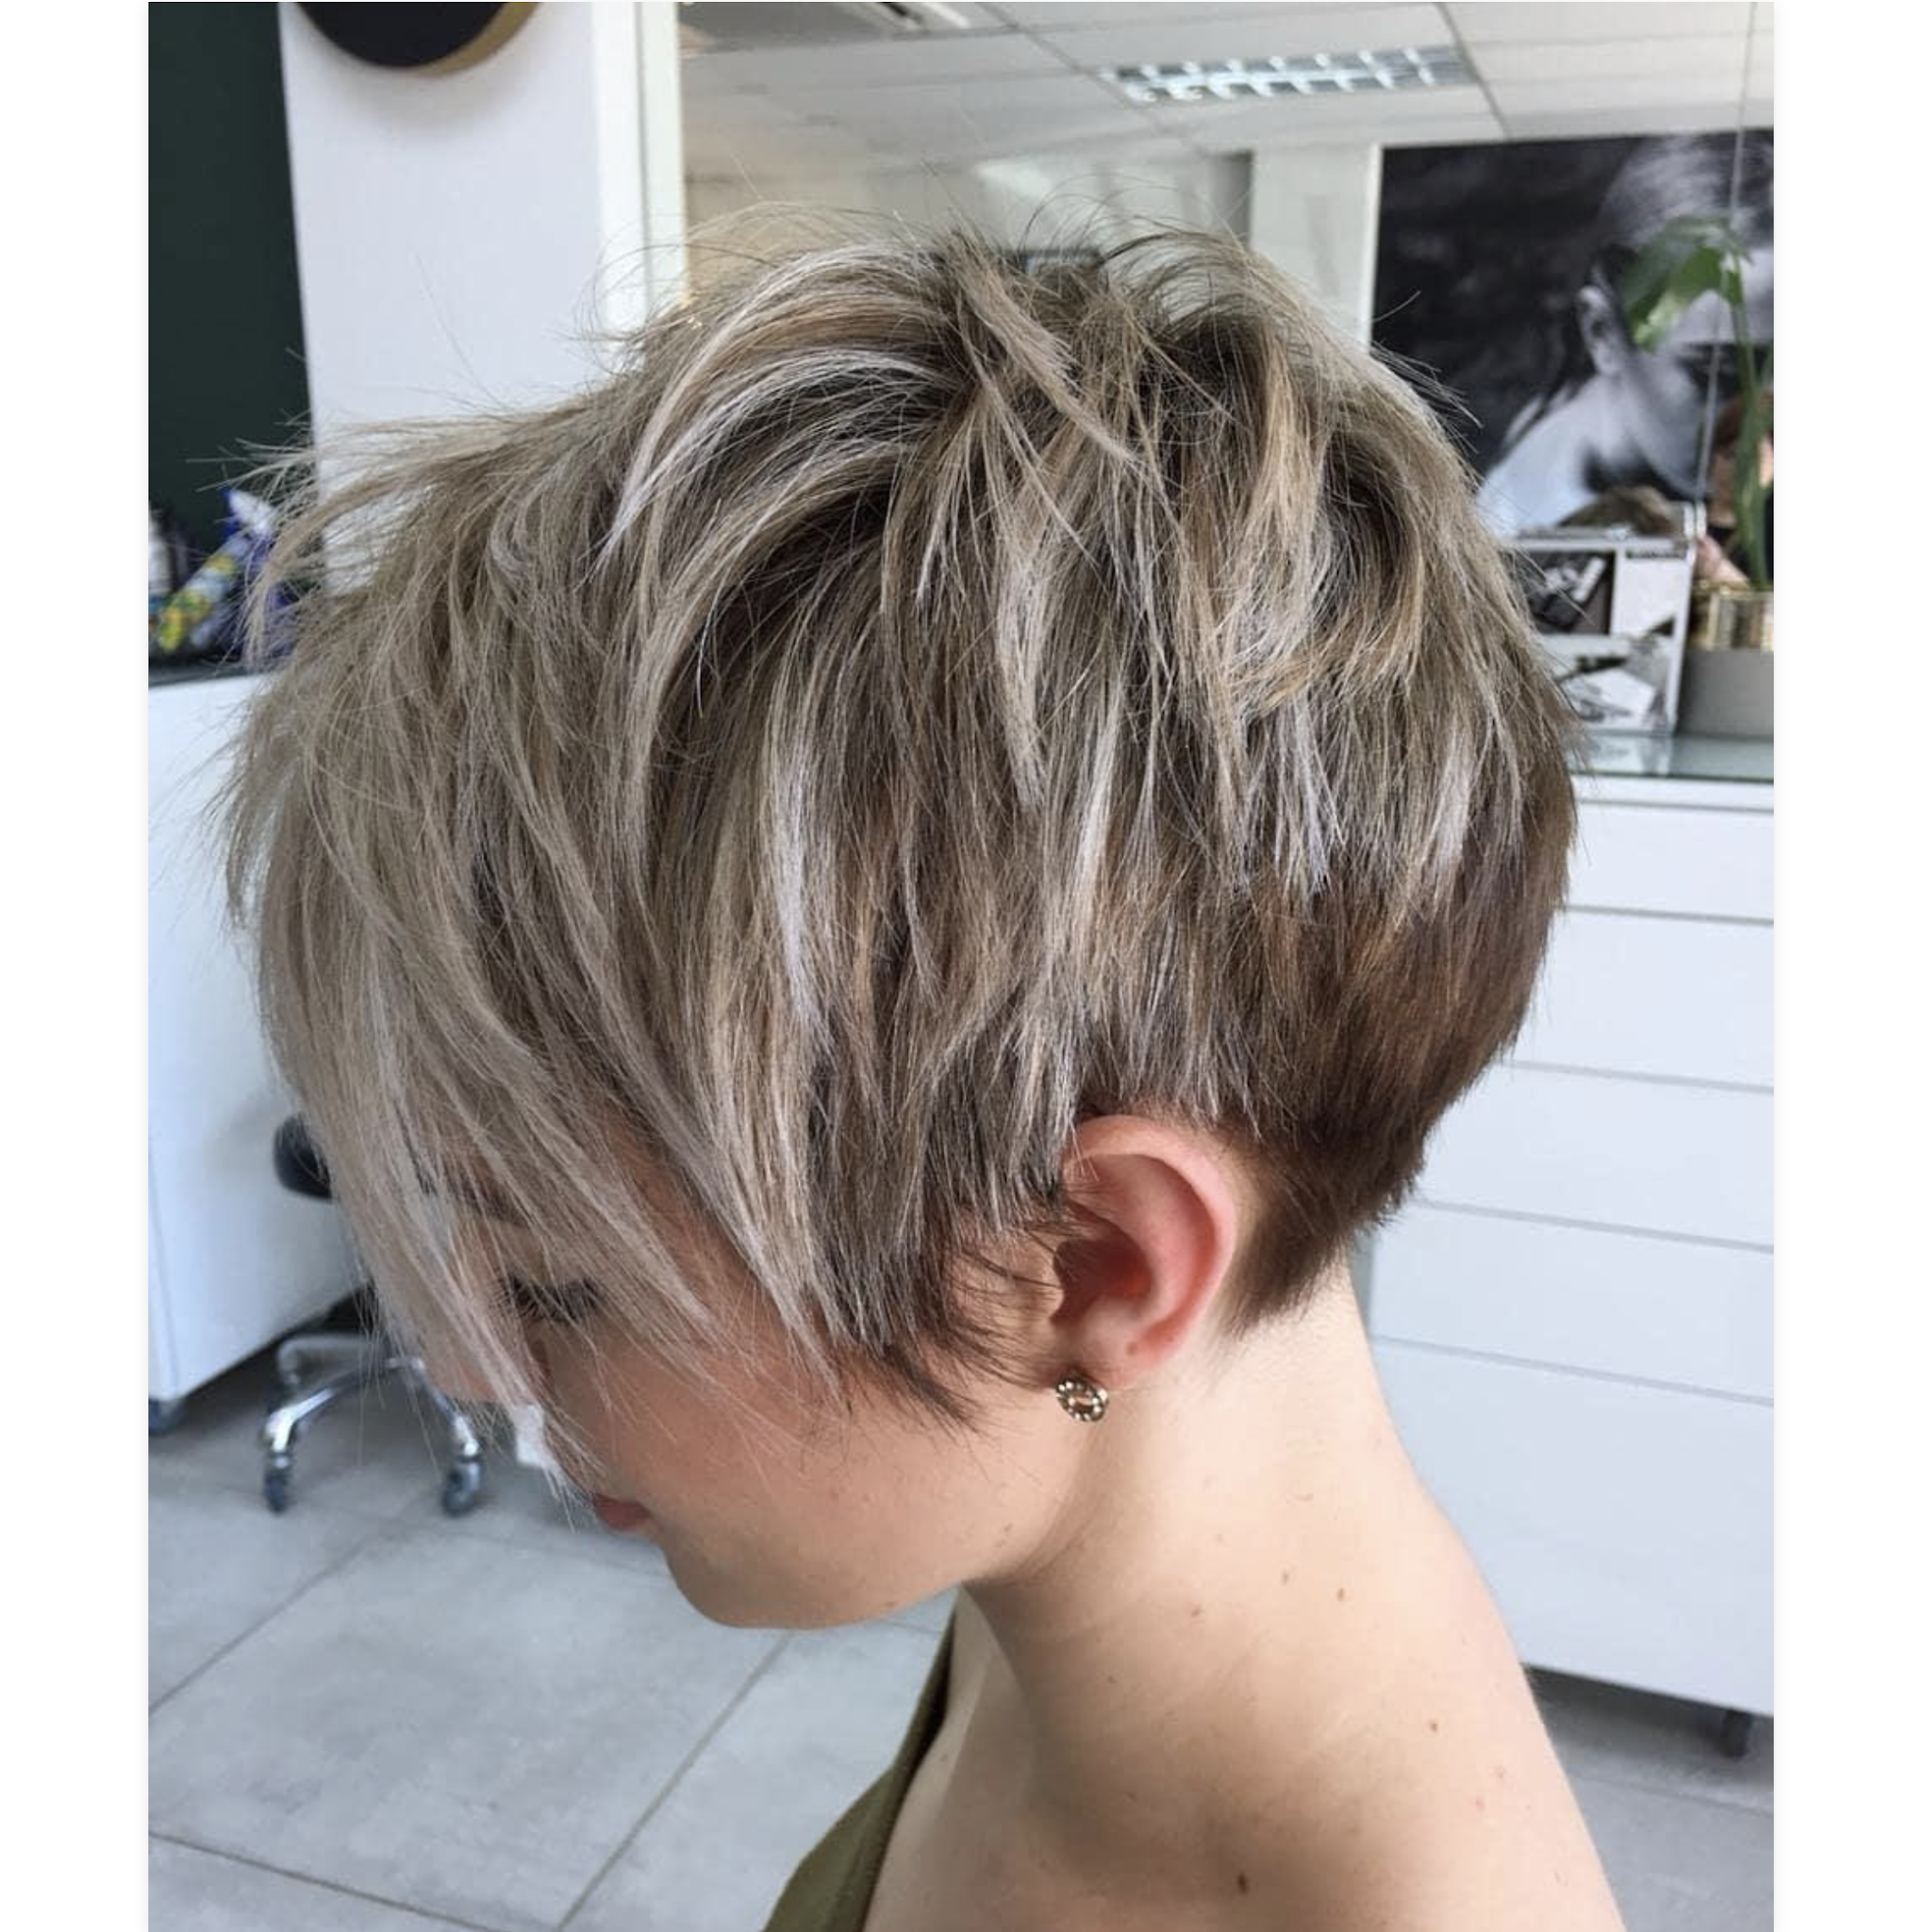 pixie haircuts for women over 50